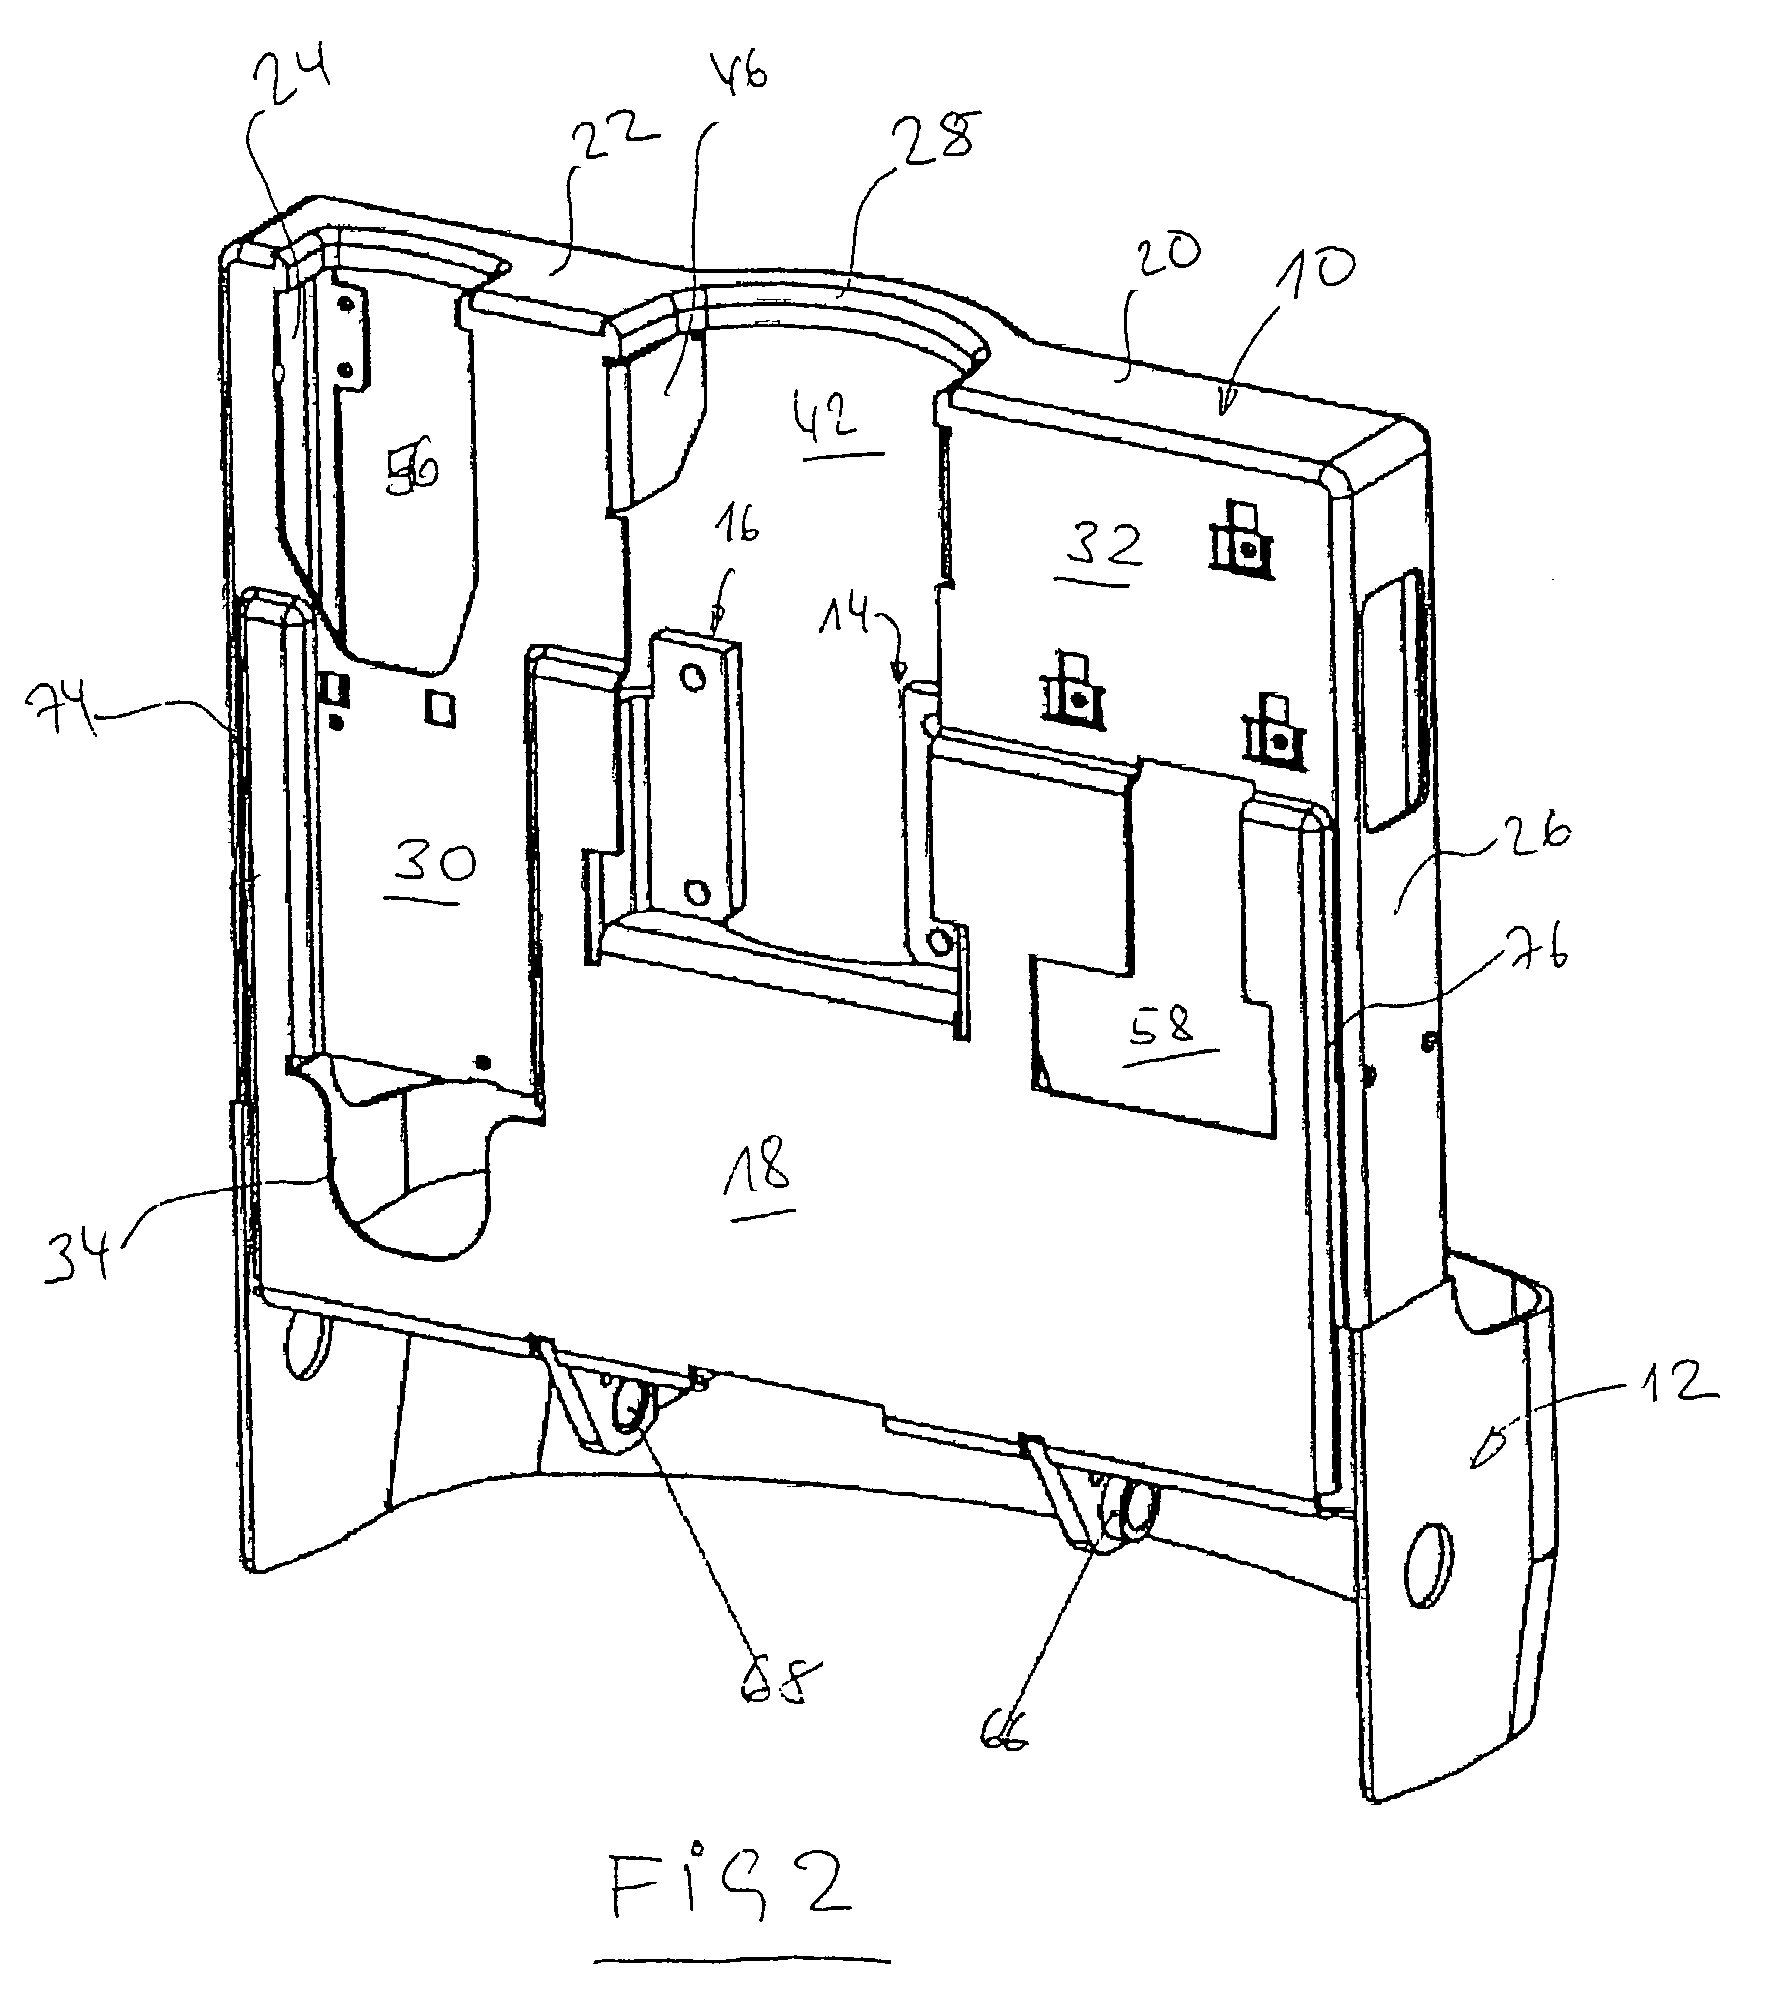 Frame for the drive unit of an industrial truck, particularly a stacker lift truck